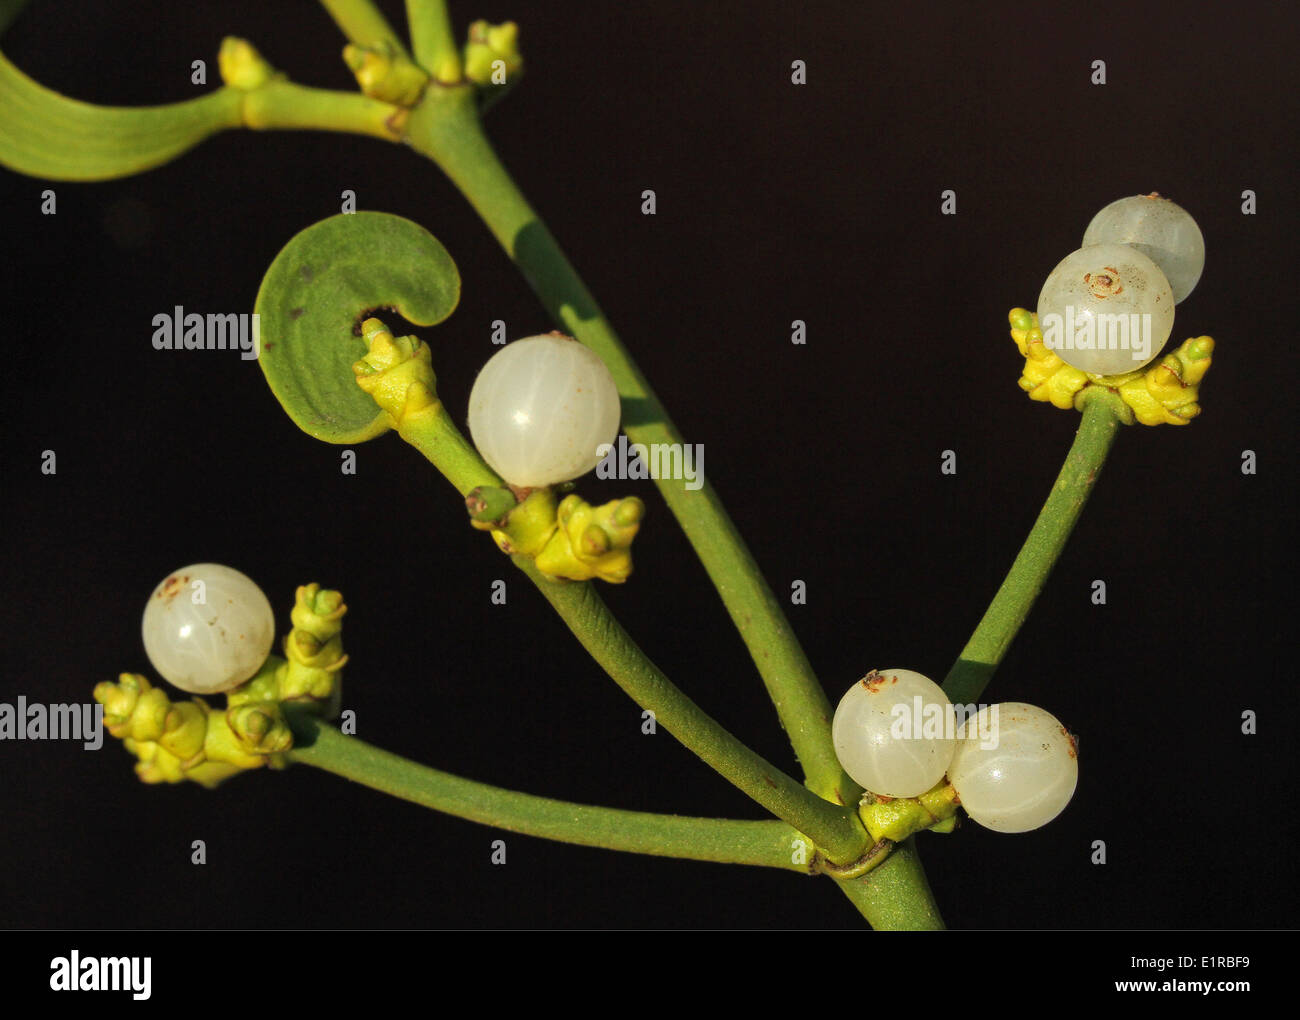 close up of mistletoe with some berries Stock Photo